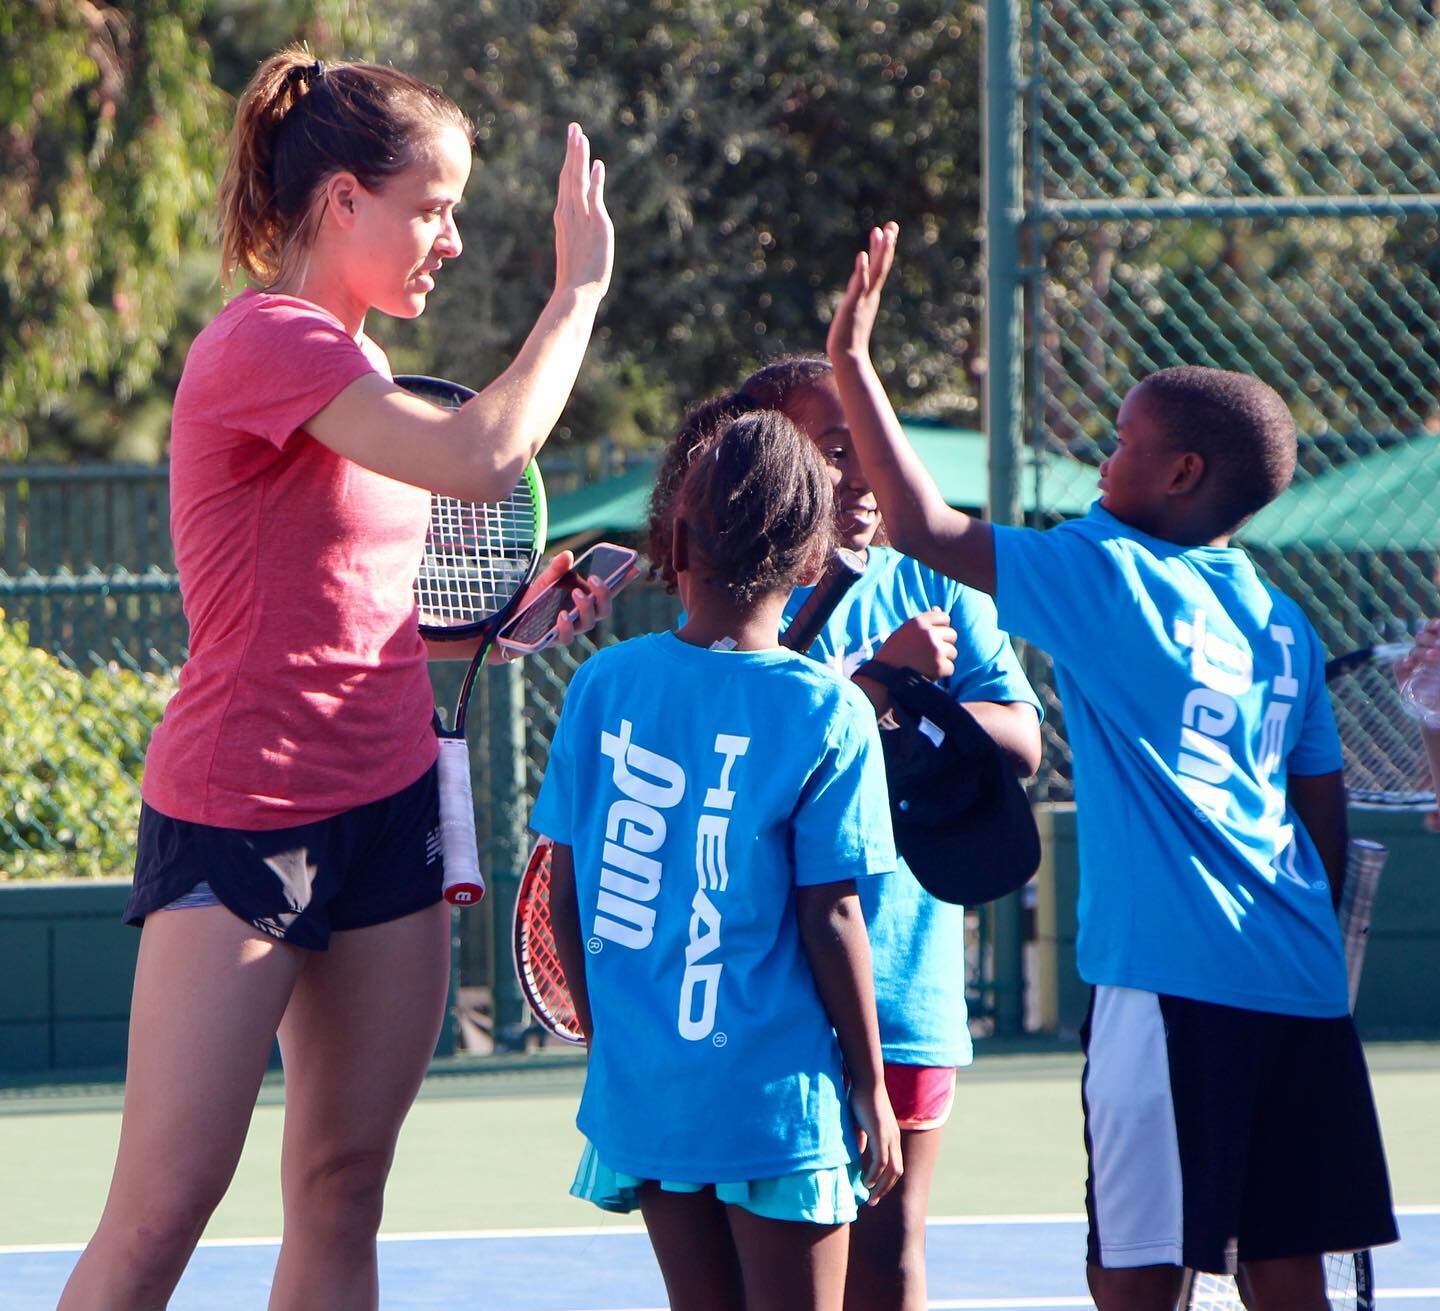 Life's most persistent and urgent question is, 'What are you doing for others? - Martin Luther King Jr. 💙✌️

#MLKDay #MLKWeekend #SoCalTennis #JuniorTennis #YouthTennis #NonProfit #FirstBreakAcademy